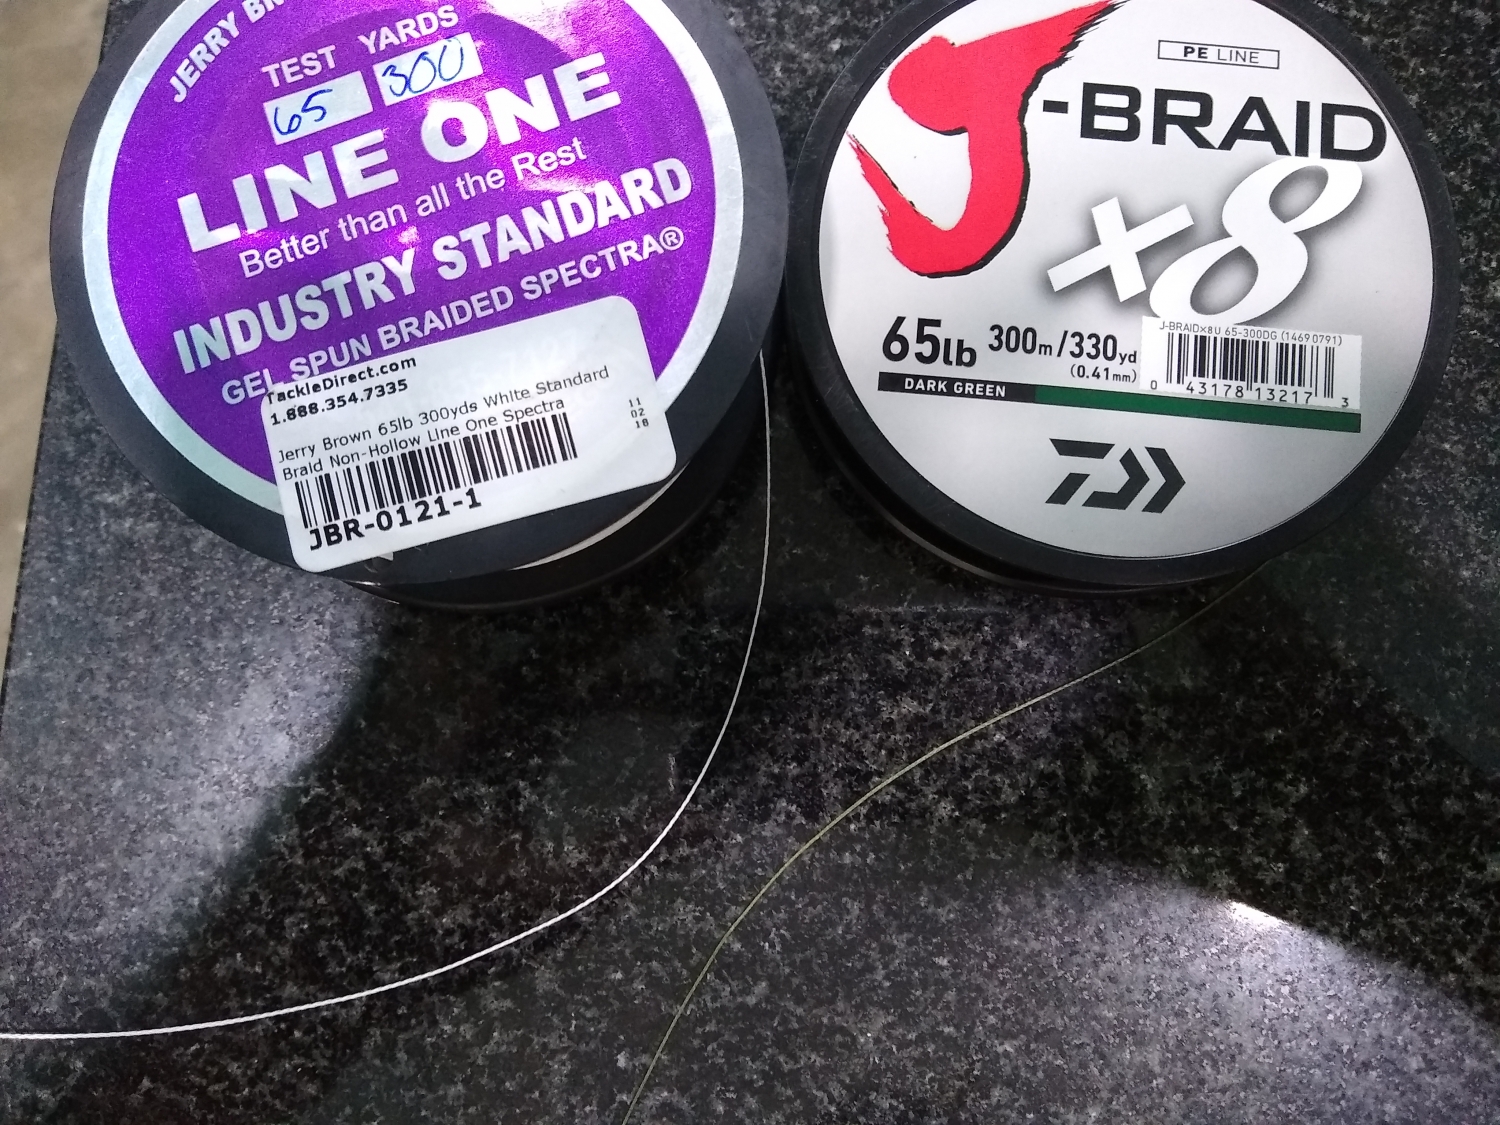 Jerry Brown Line One Non-Hollow Spectra Braided Line 300yds 30lb White